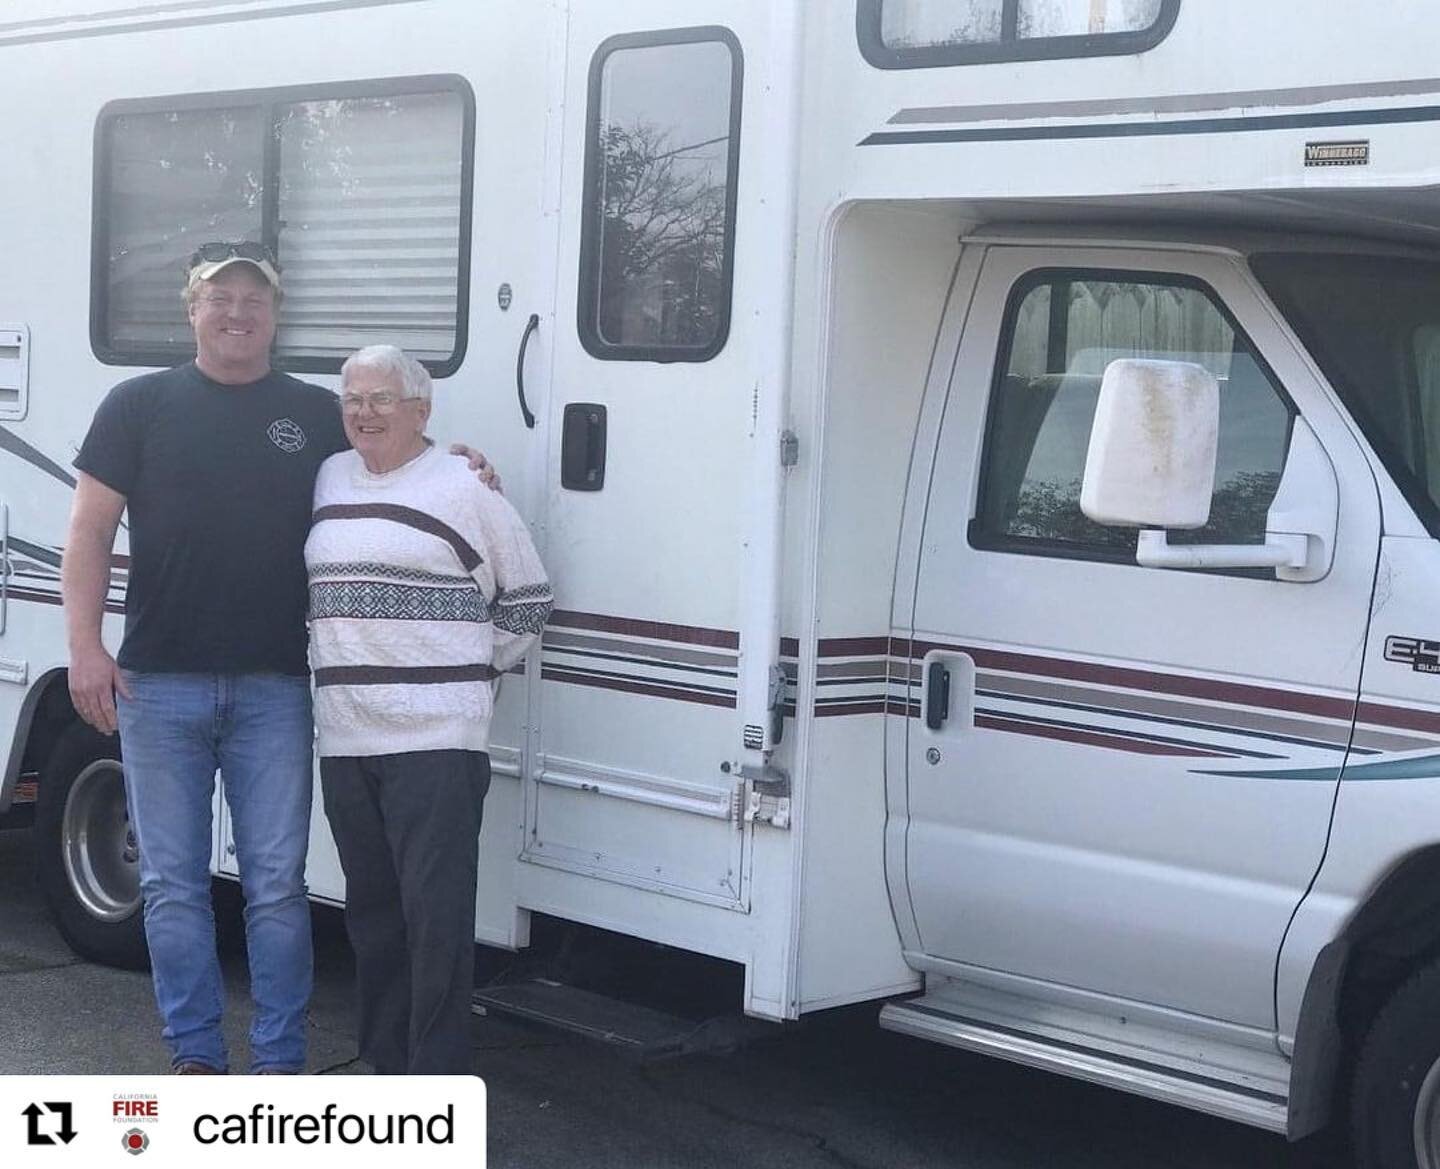 #Repost @cafirefound with @make_repost
・・・
With your gracious donations, we disbursed over $1.3 million in grants to 133 fire departments and community groups in 2020. @emergencyrv provided emergency, transitional housing to CA families and first res